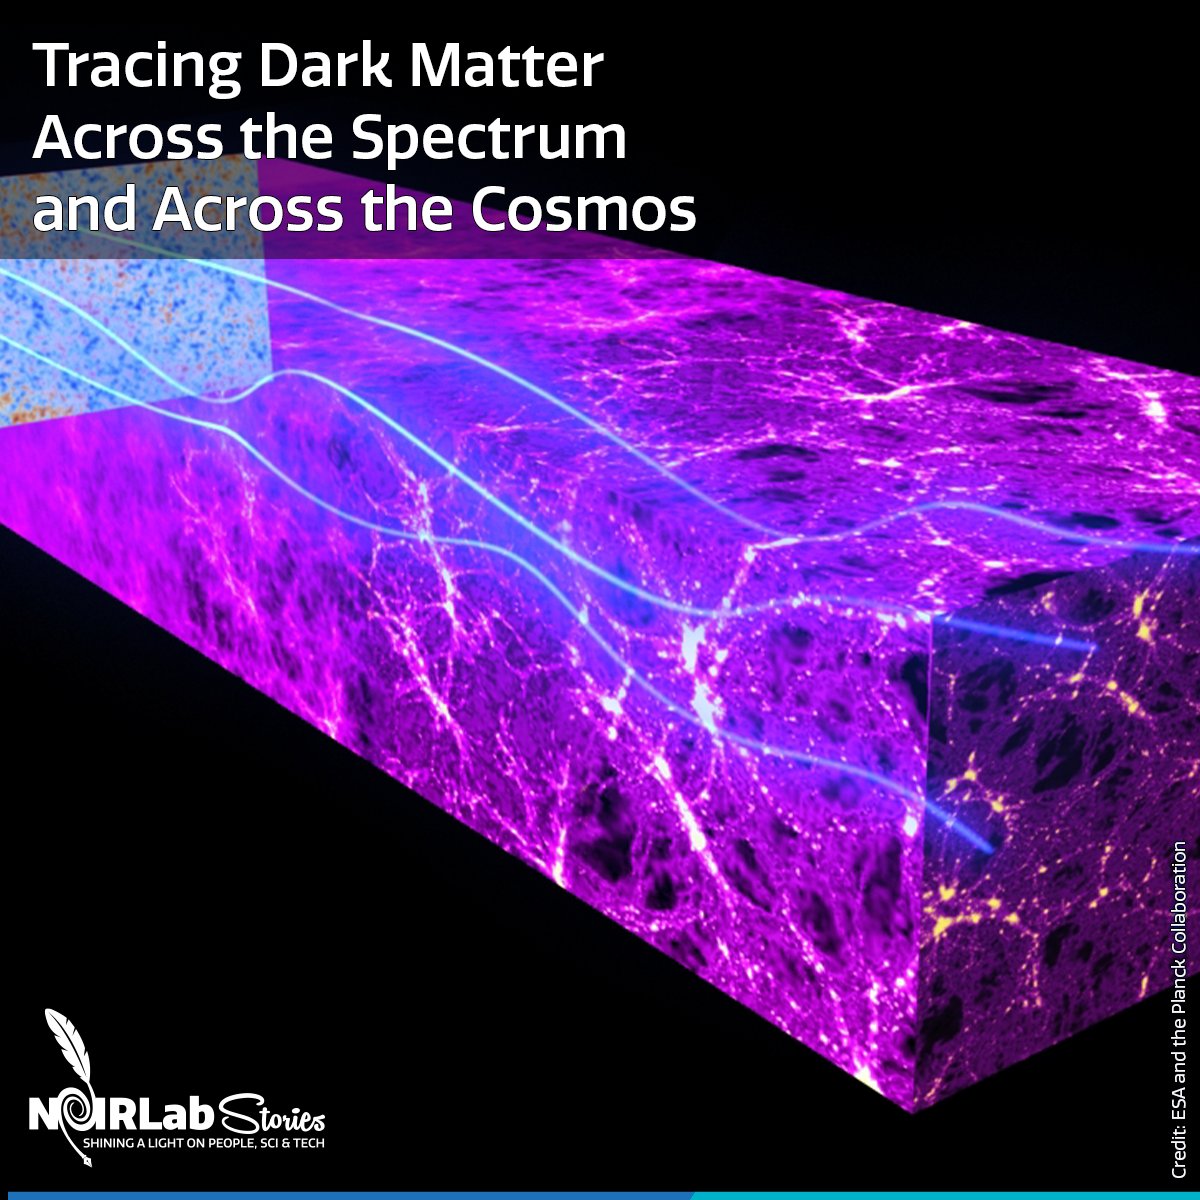 Two cosmological surveys from the @theDESurvey and the @SPTelescope combine forces to place powerful new constraints on the Standard Model of cosmology. Read more about mapping the Universe in our latest NOIRLab Stories post: noirlab.edu/public/blog/tw… #NOIRLabStories #NSFstories